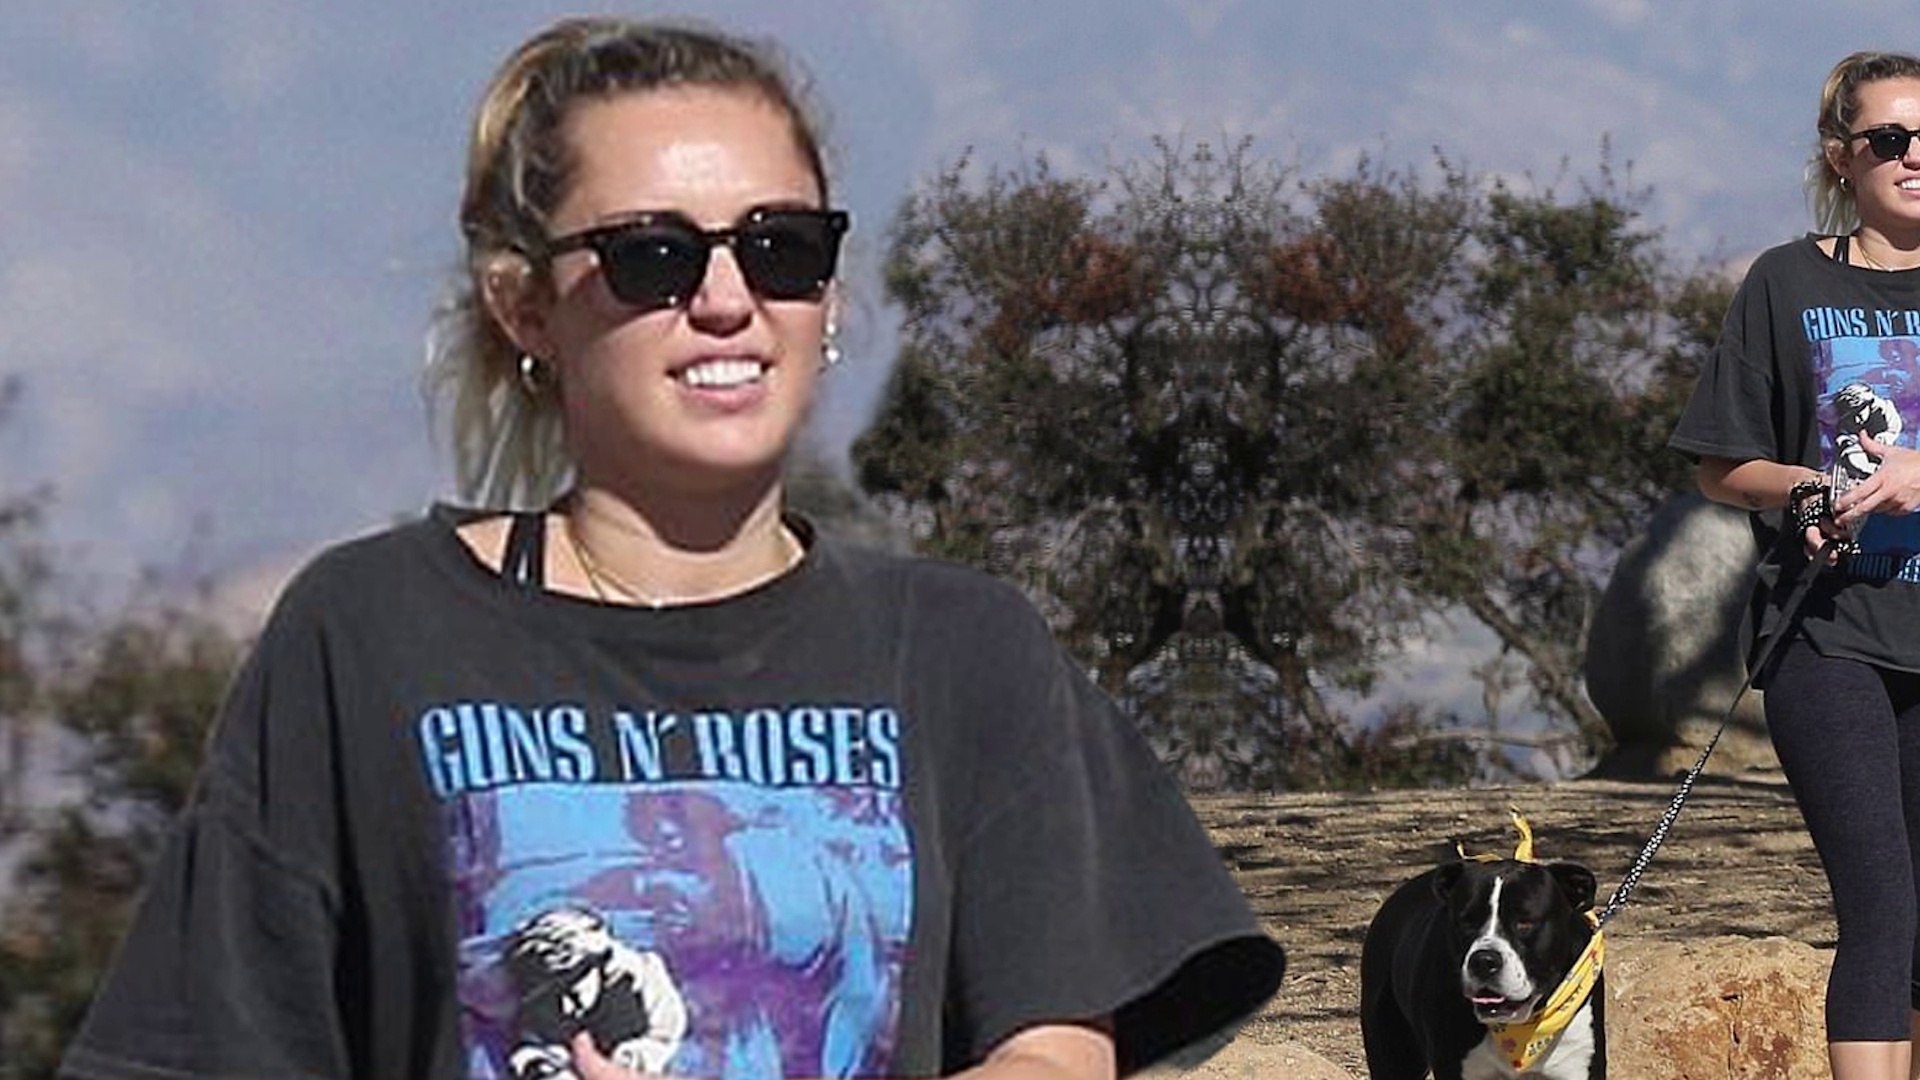 Miley Cyrus is rock star chic as she wears Guns N' Roses tee during hike with pet pooch Mary Ja